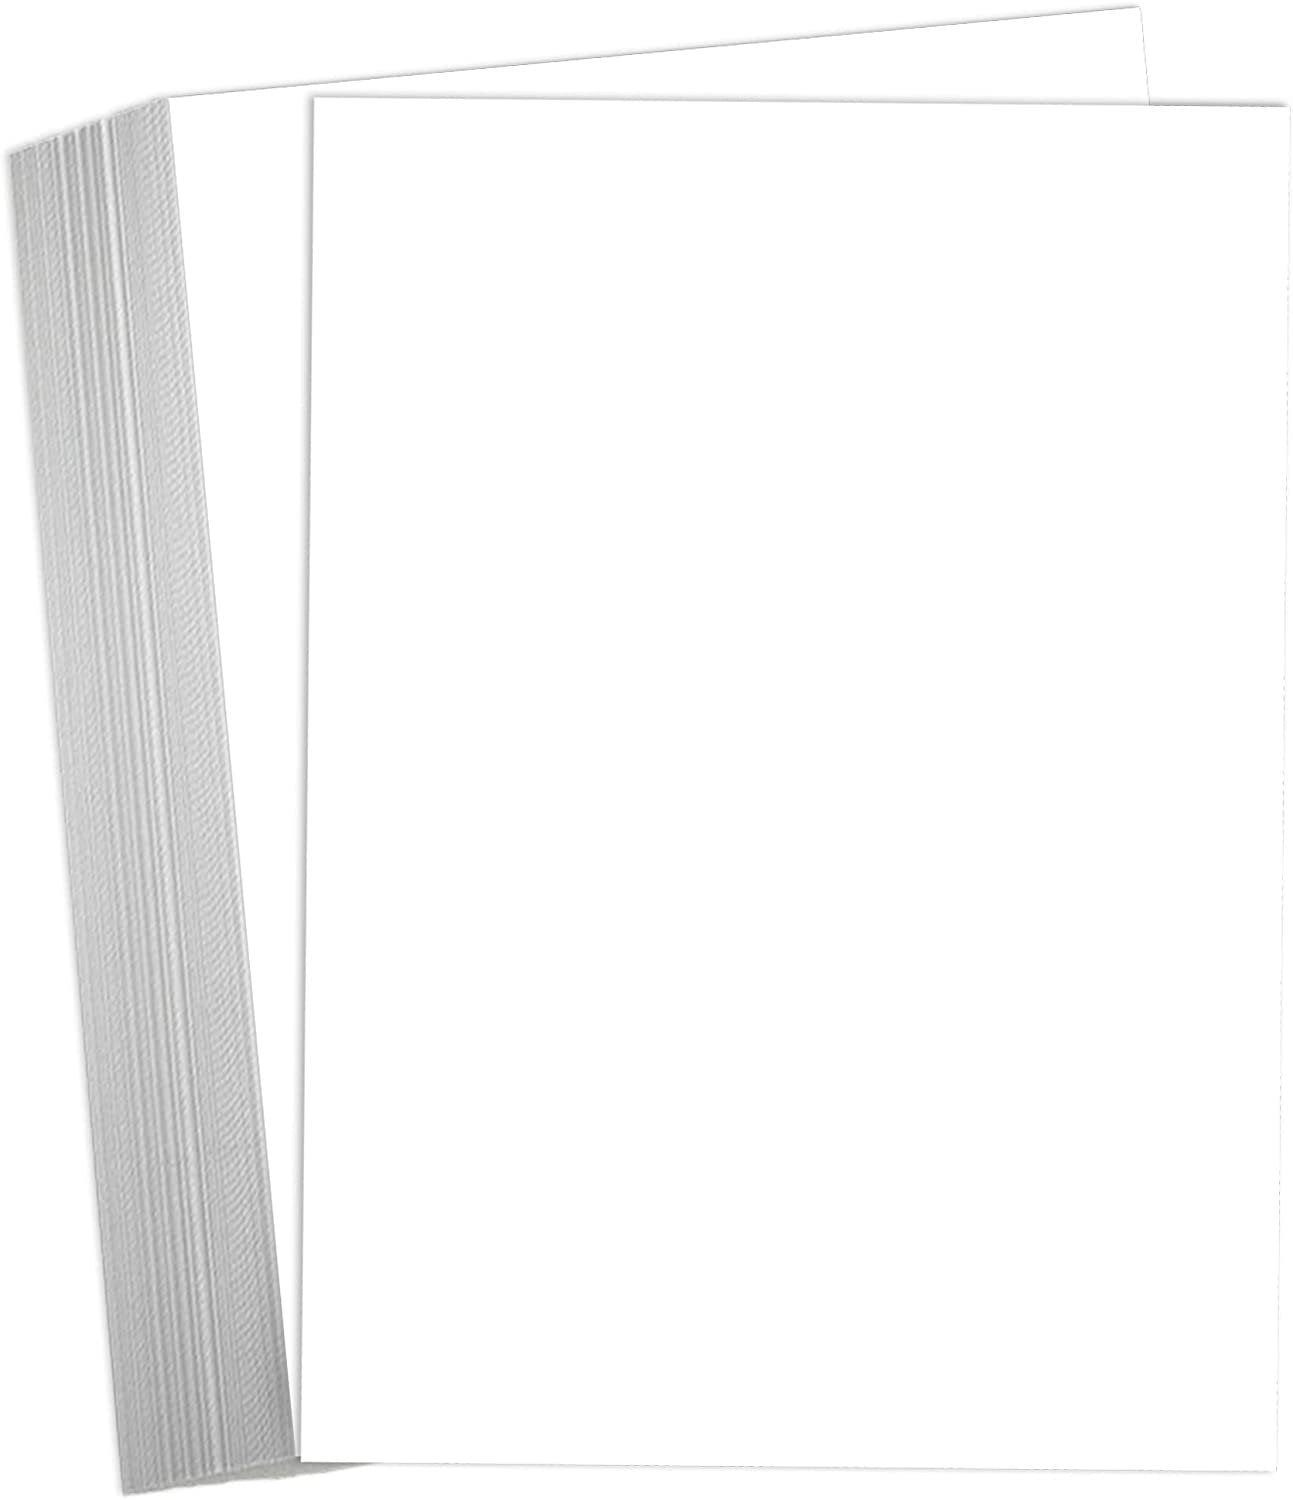 Art Projects 20 White Card Stock Paper 8.5 x 11 -Office-School Supplies 